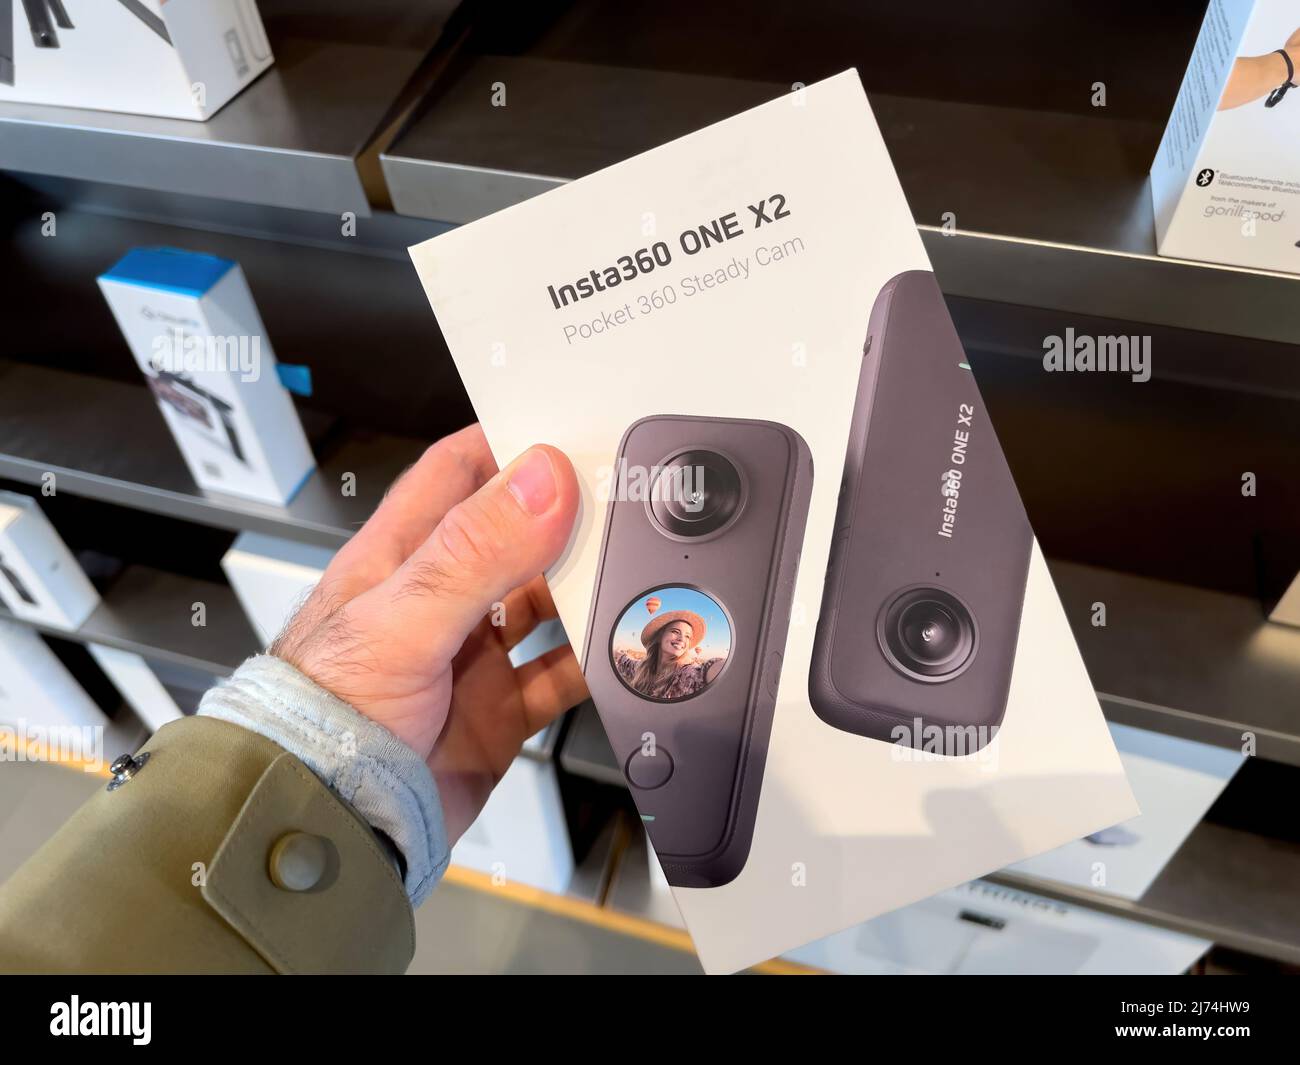 Paris, France - Mar 18, 2022: POV male hand holding new Insta360 one x2 pocket 260 steady cam camera at the Apple Inc. flagship store Stock Photo